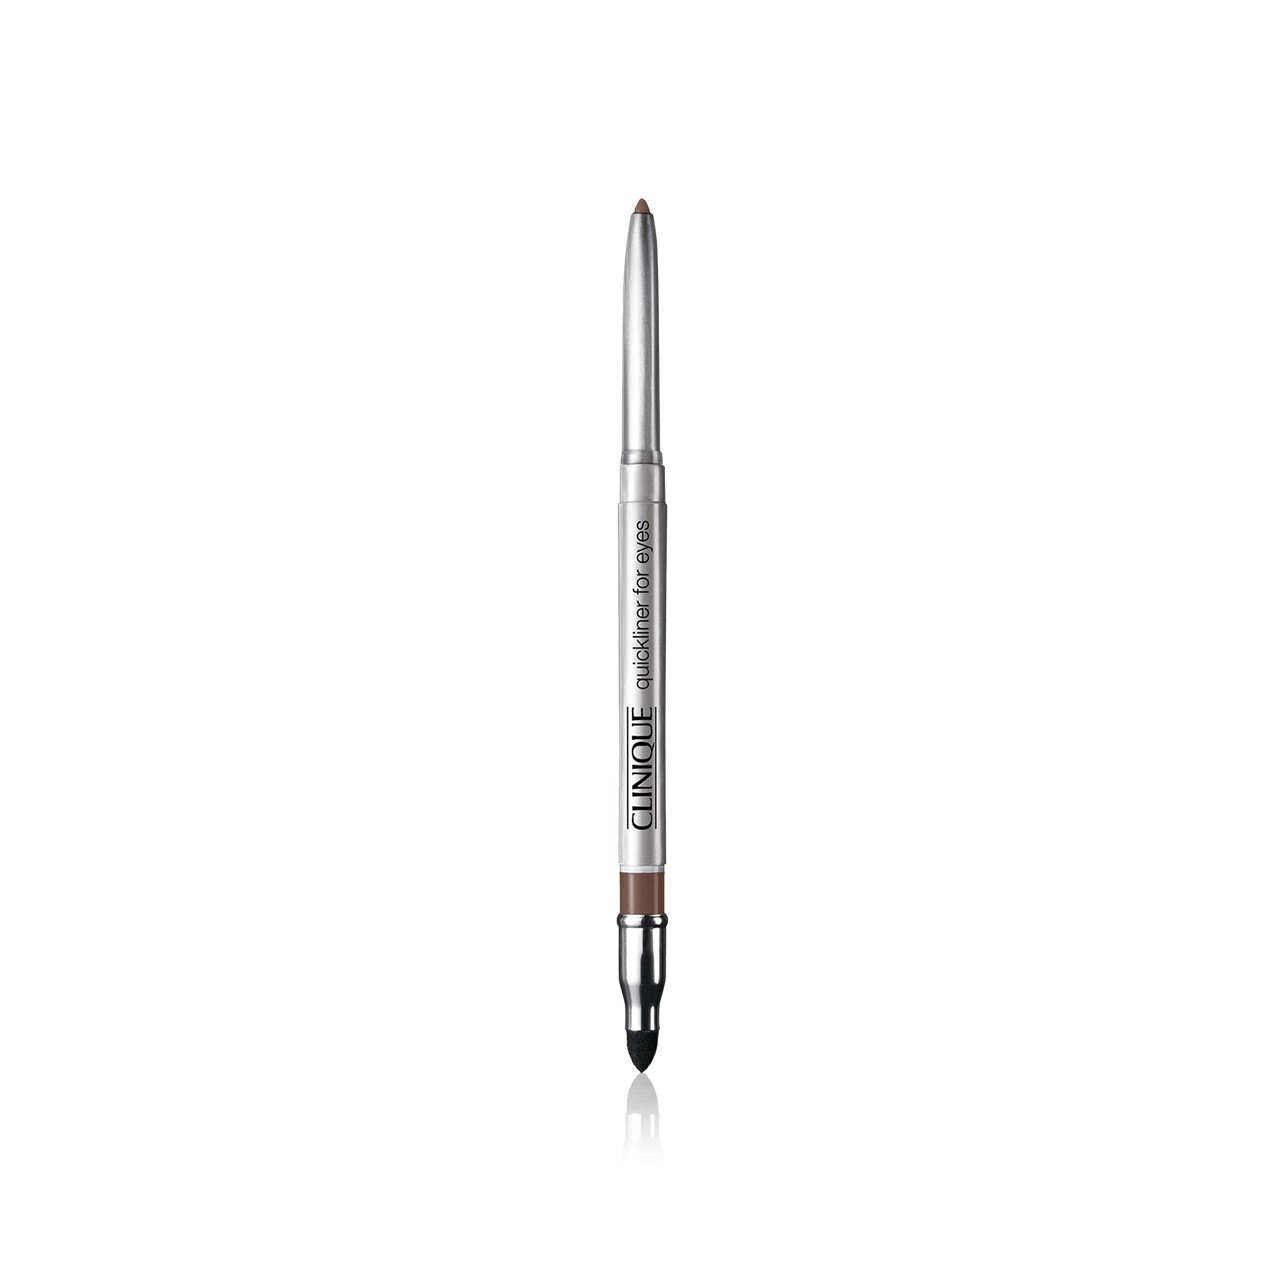 Clinique Quickliner For Eyes Roast Coffee 0.3g (0.01oz)